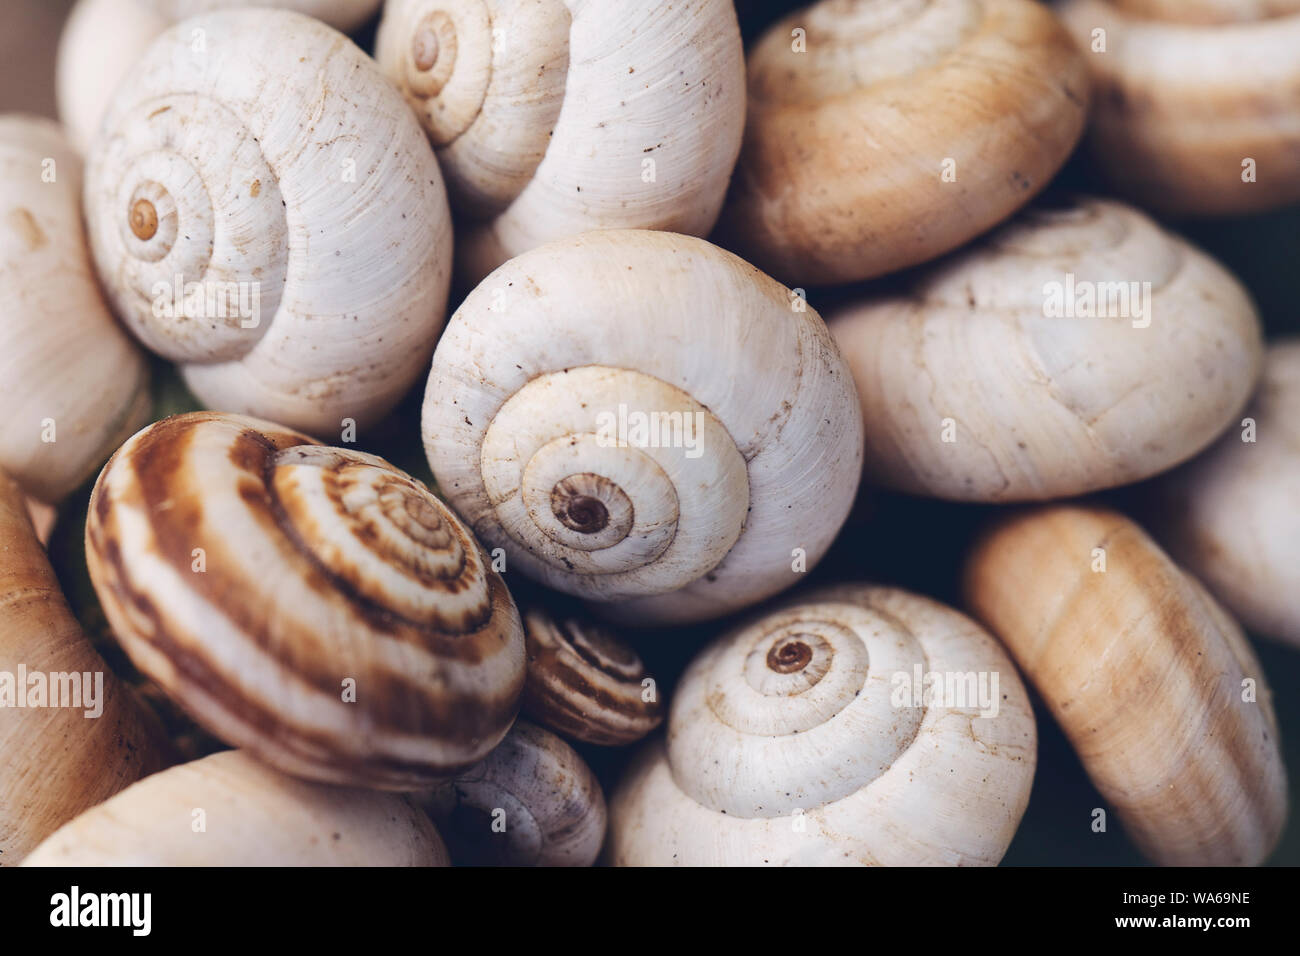 3,568 A Spiral Shell Of A Snail Stock Photos, High-Res Pictures